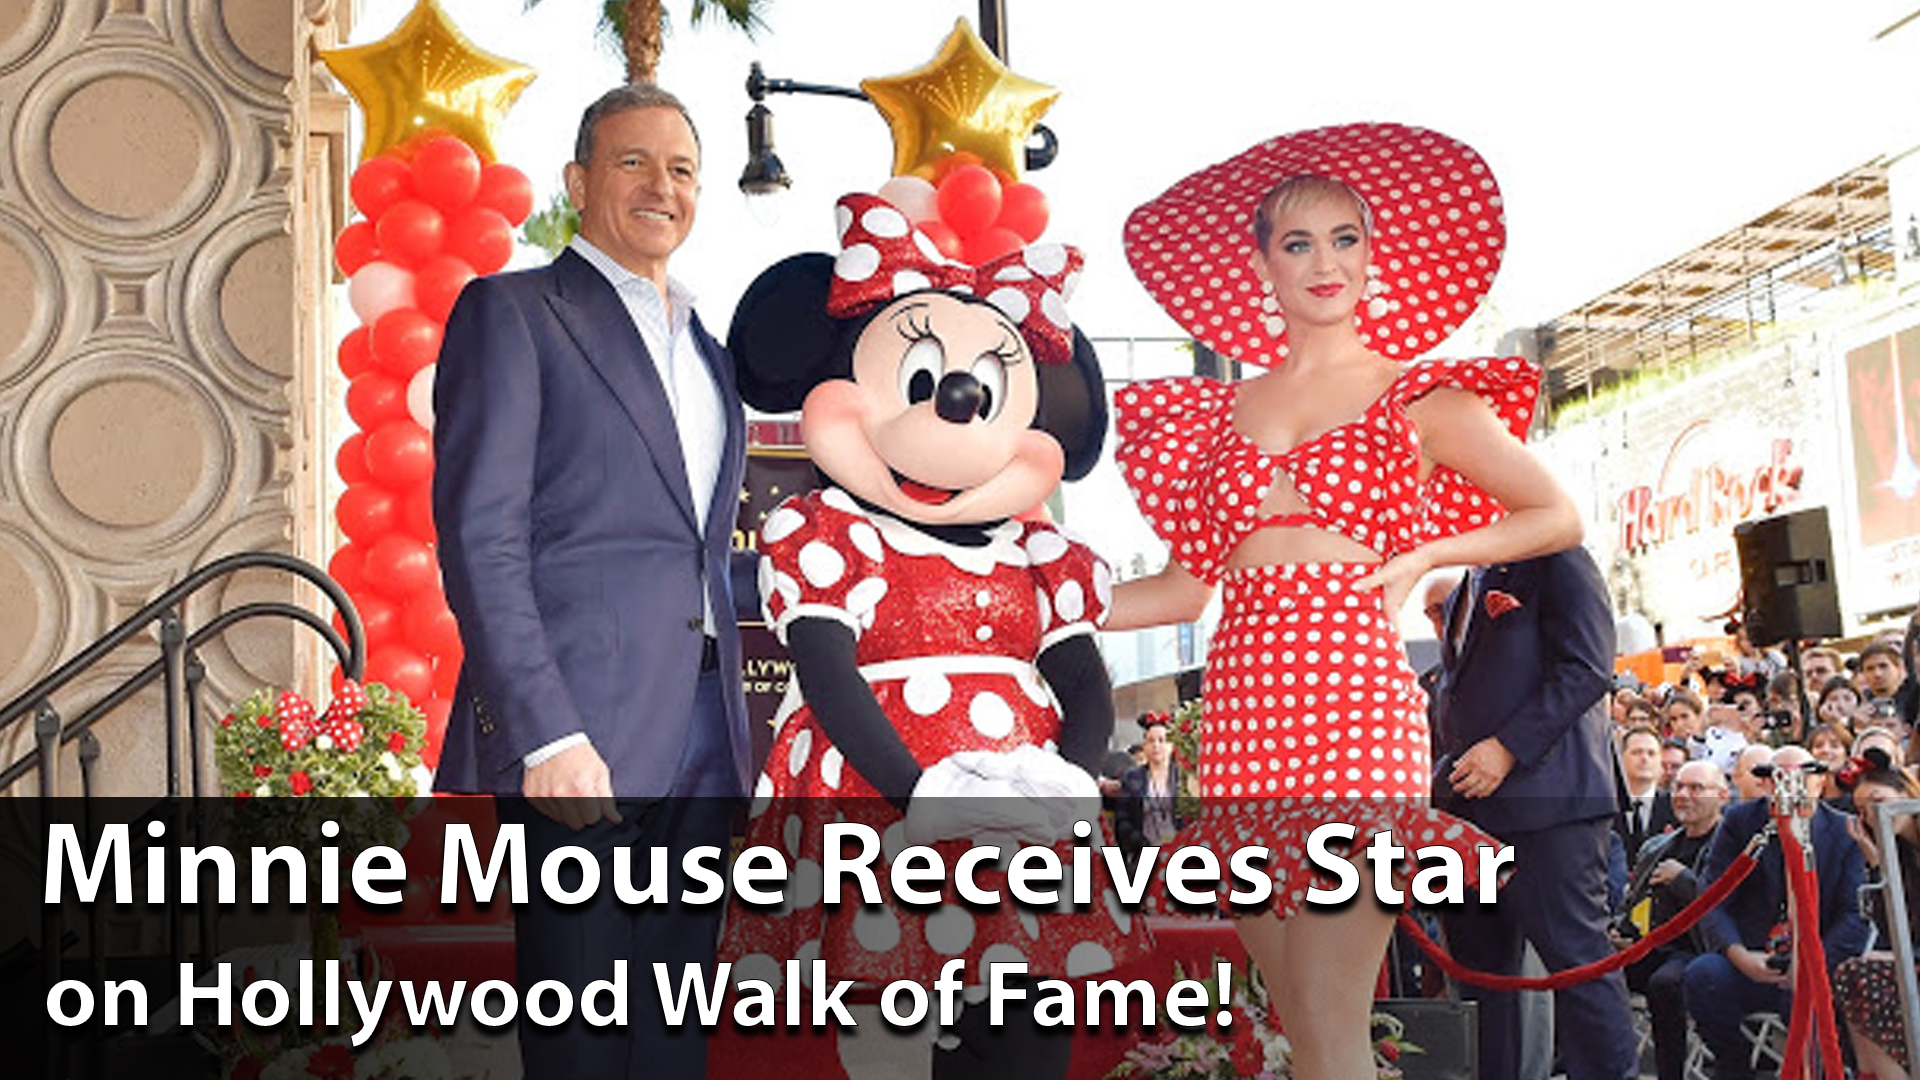 Minnie Mouse Receives Star on Hollywood Walk of Fame